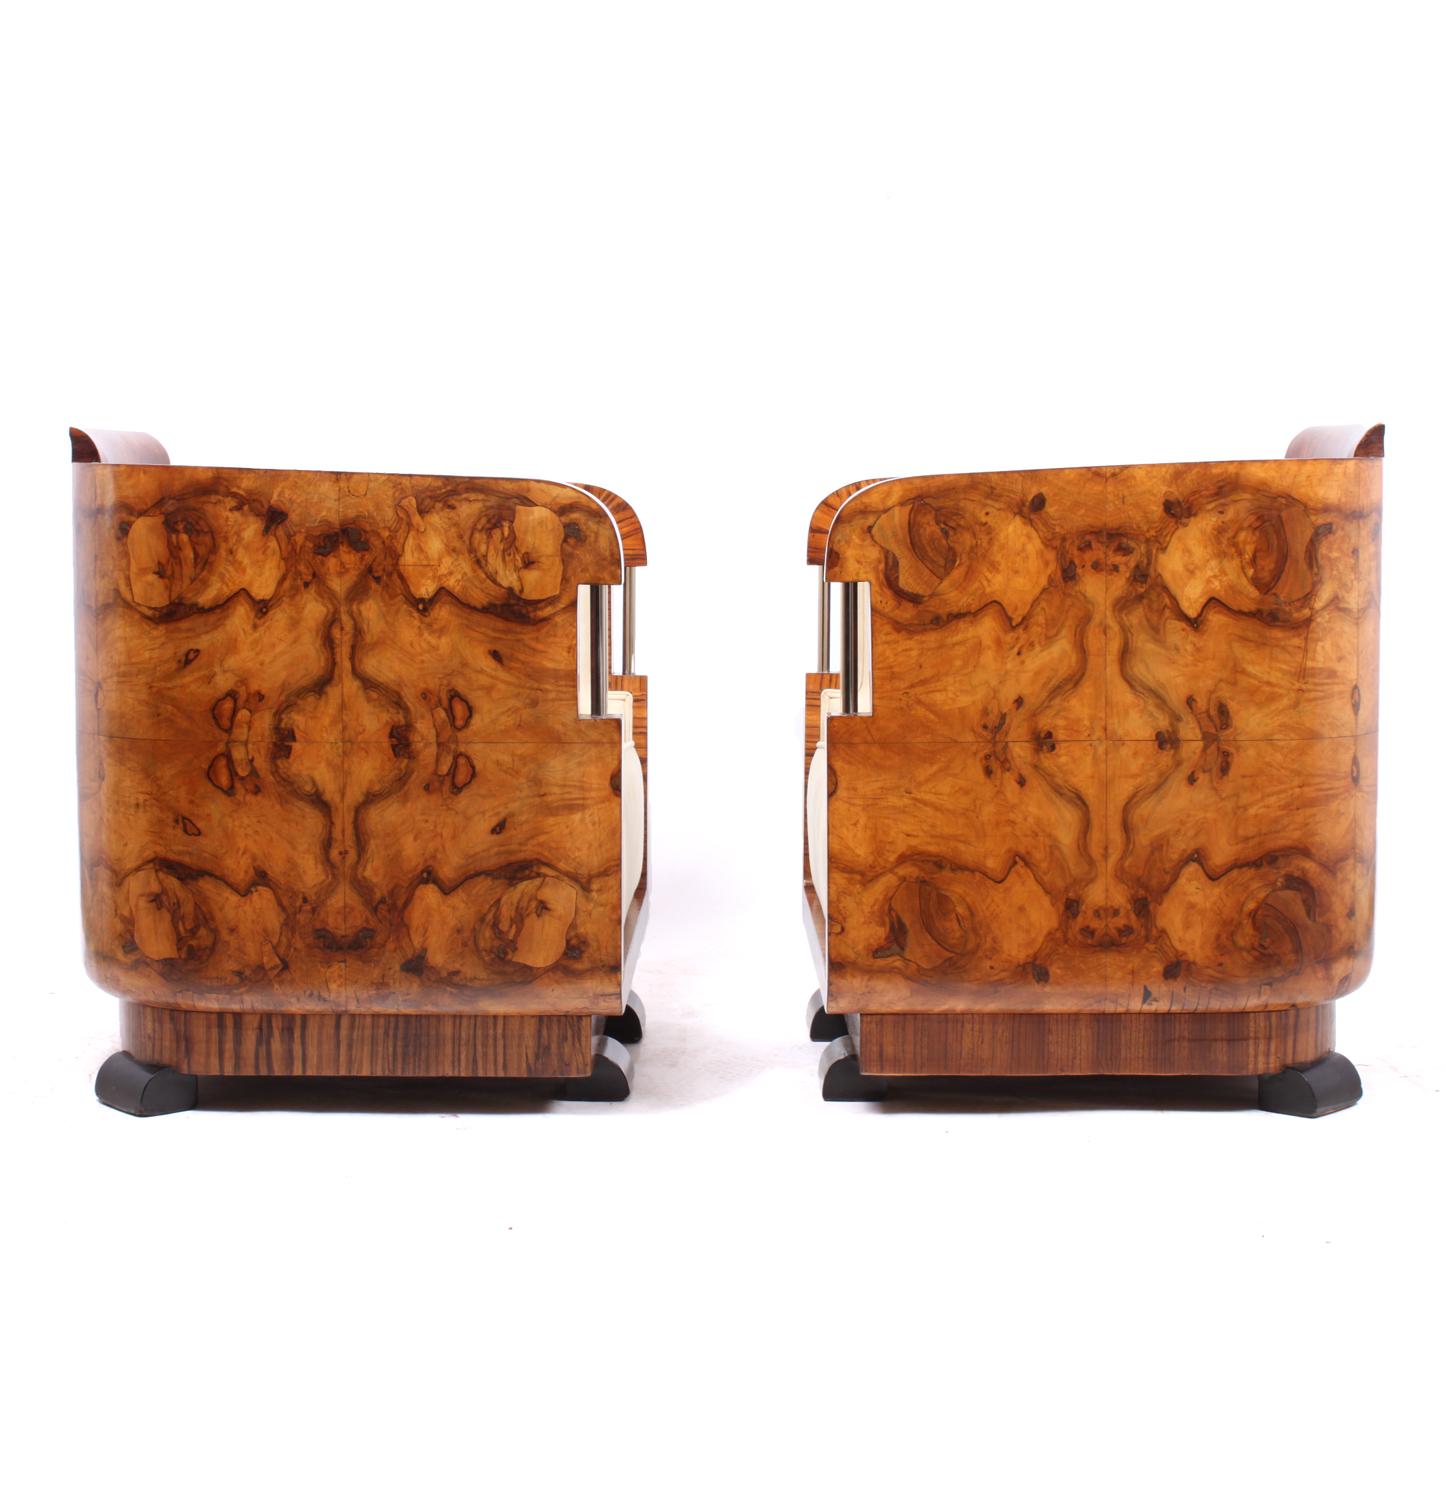 Pair of Italian Art Deco armchairs and stools
This pair of Art Deco armchairs and stools were produced in Italy the 1920s they have figured walnut wraparound backs with chromed steel detailing, these chairs and stools have been fully restored hand